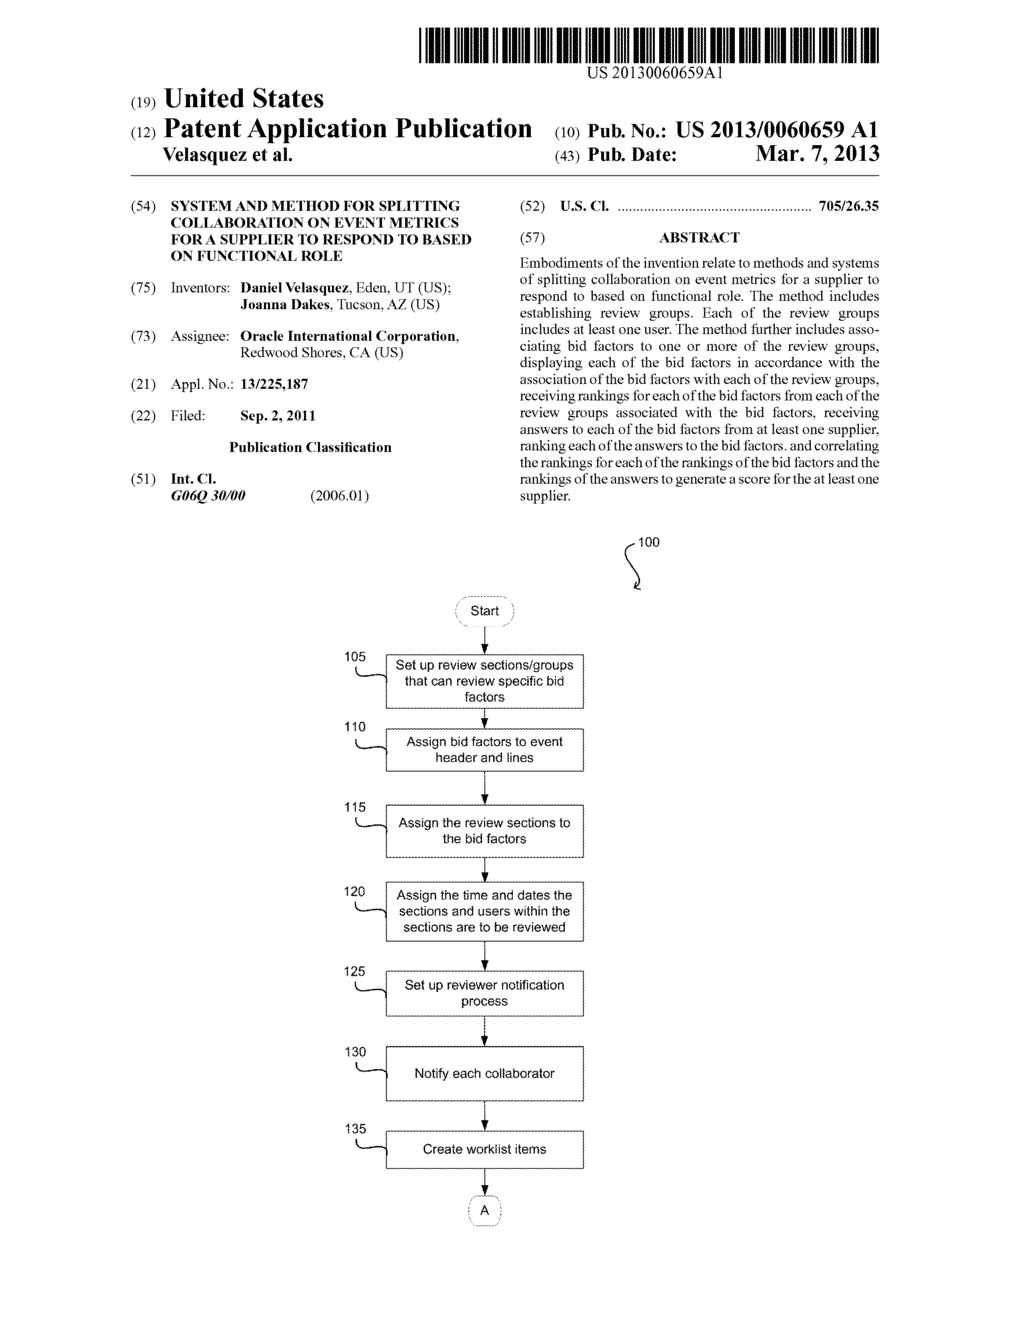 SYSTEM AND METHOD FOR SPLITTING COLLABORATION ON EVENT METRICS FOR A     SUPPLIER TO RESPOND TO BASED ON FUNCTIONAL ROLE - diagram, schematic, and image 01